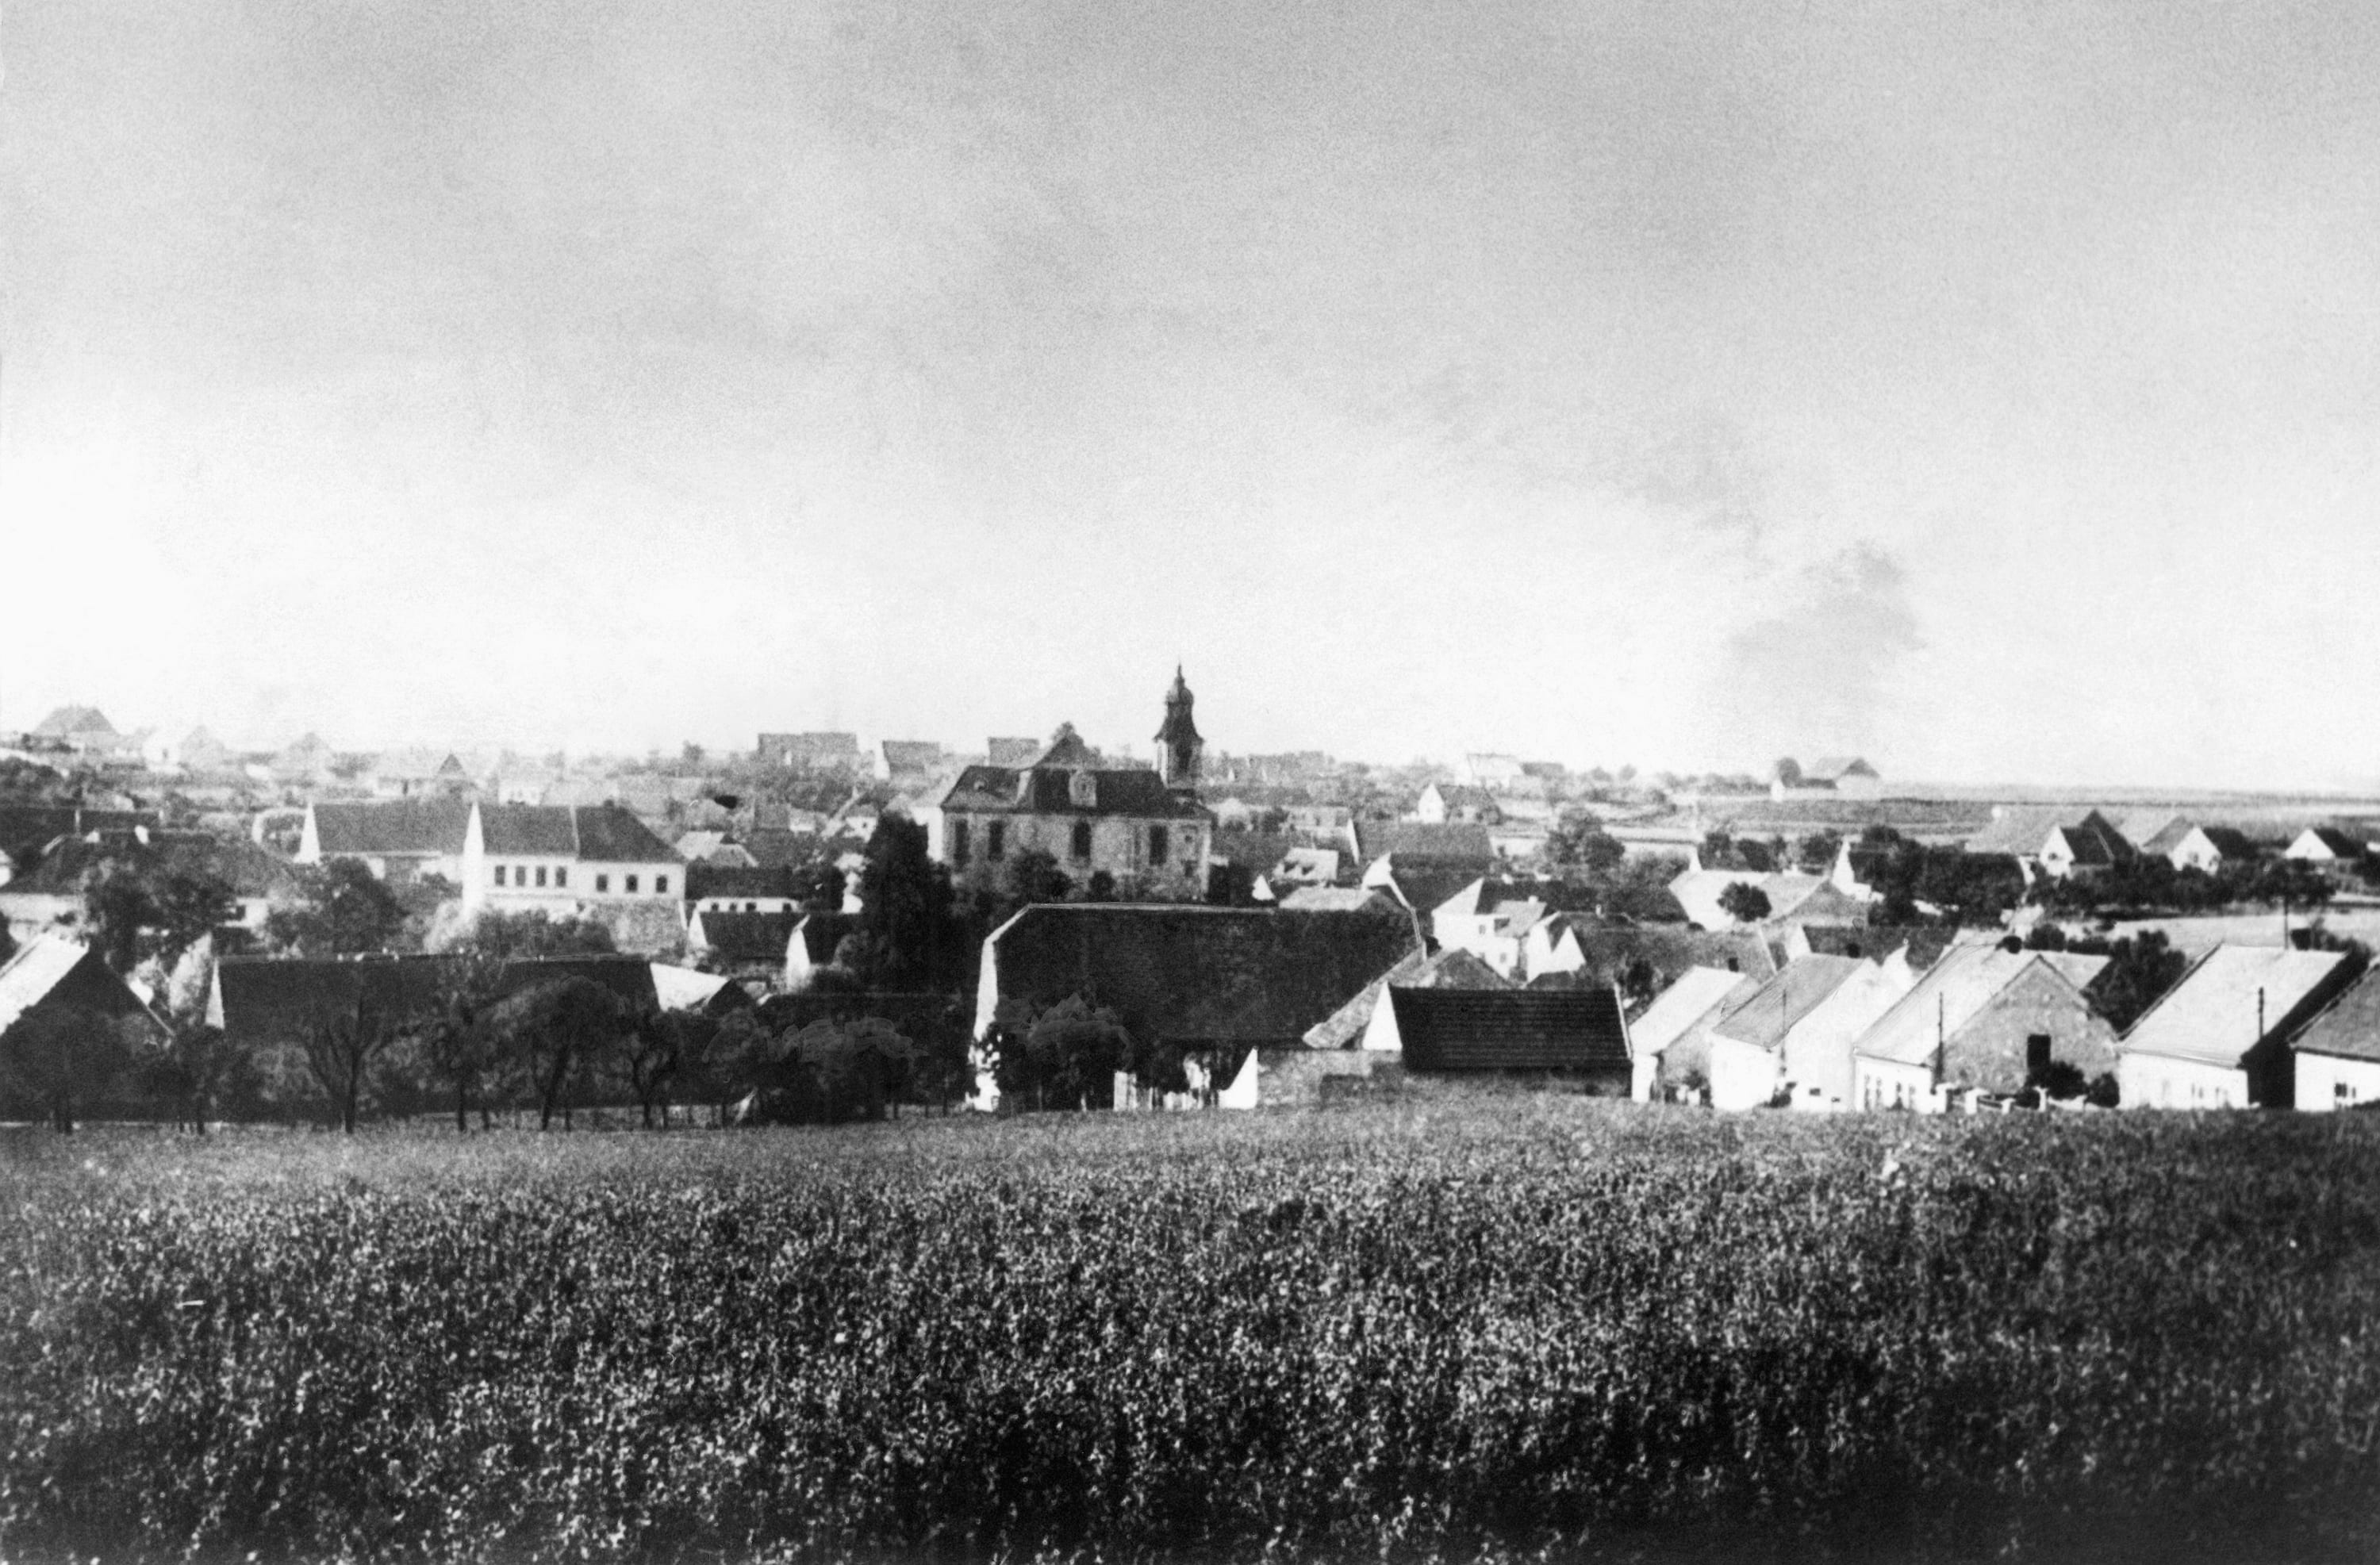 The village of Lidice, Czechoslovakia, before it was burned to the ground by Nazis on June 10, 1942. Very few escaped the massacre, which was an effort to dig out a group of Czech resistance fighters. (AP Photo/Czech News Agency)